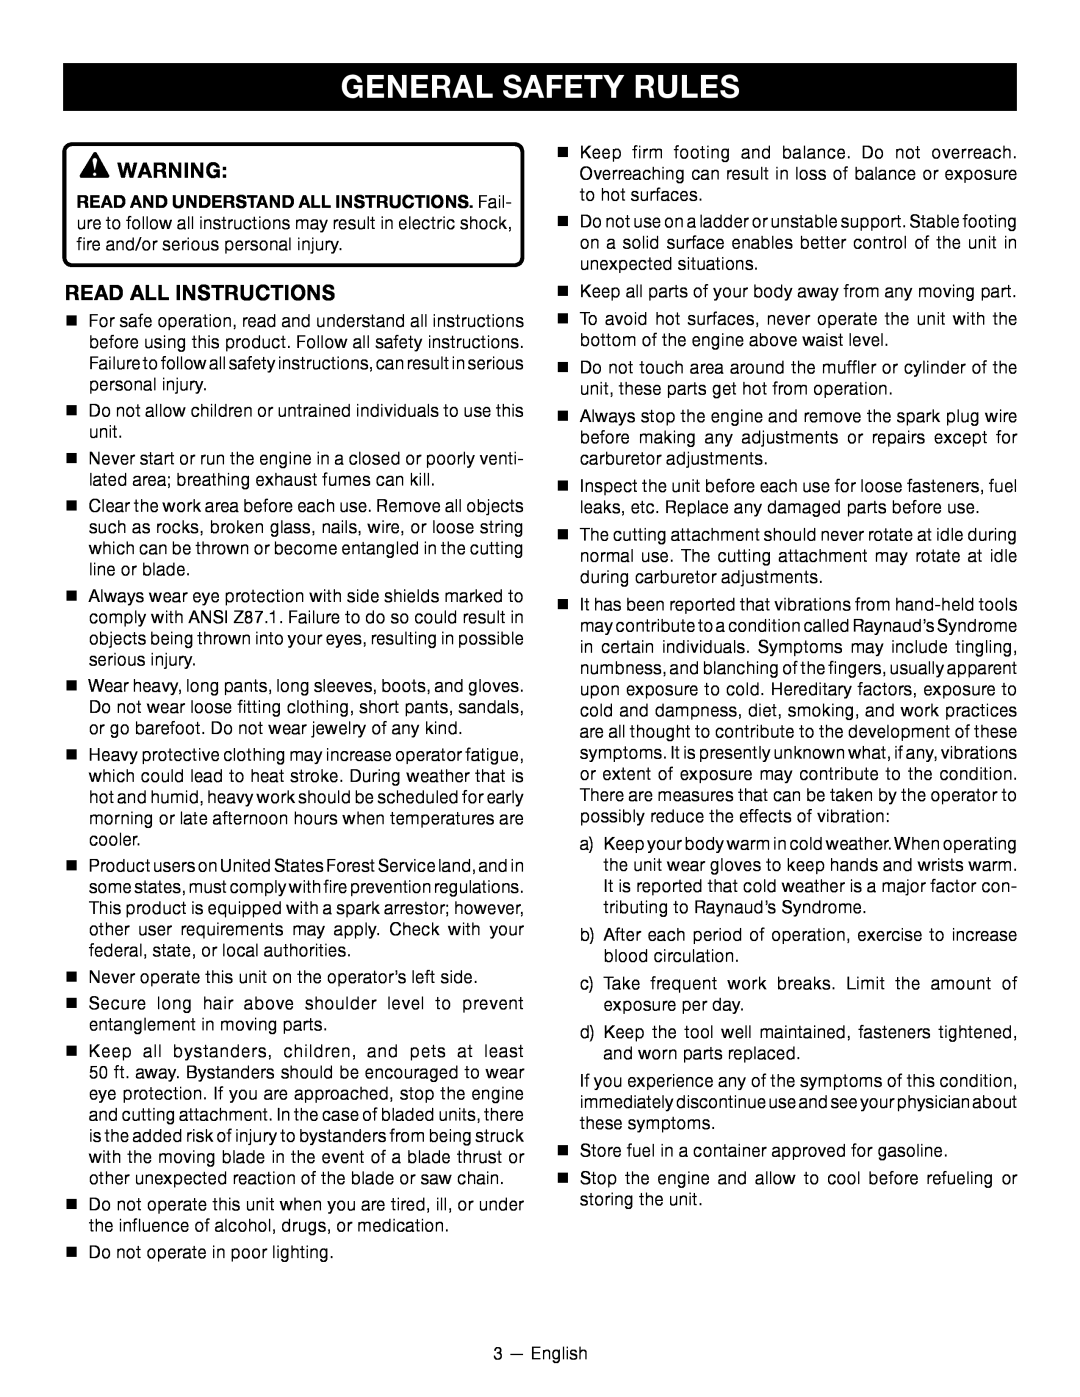 Ryobi RY34001 manuel dutilisation General Safety Rules, Read All Instructions 